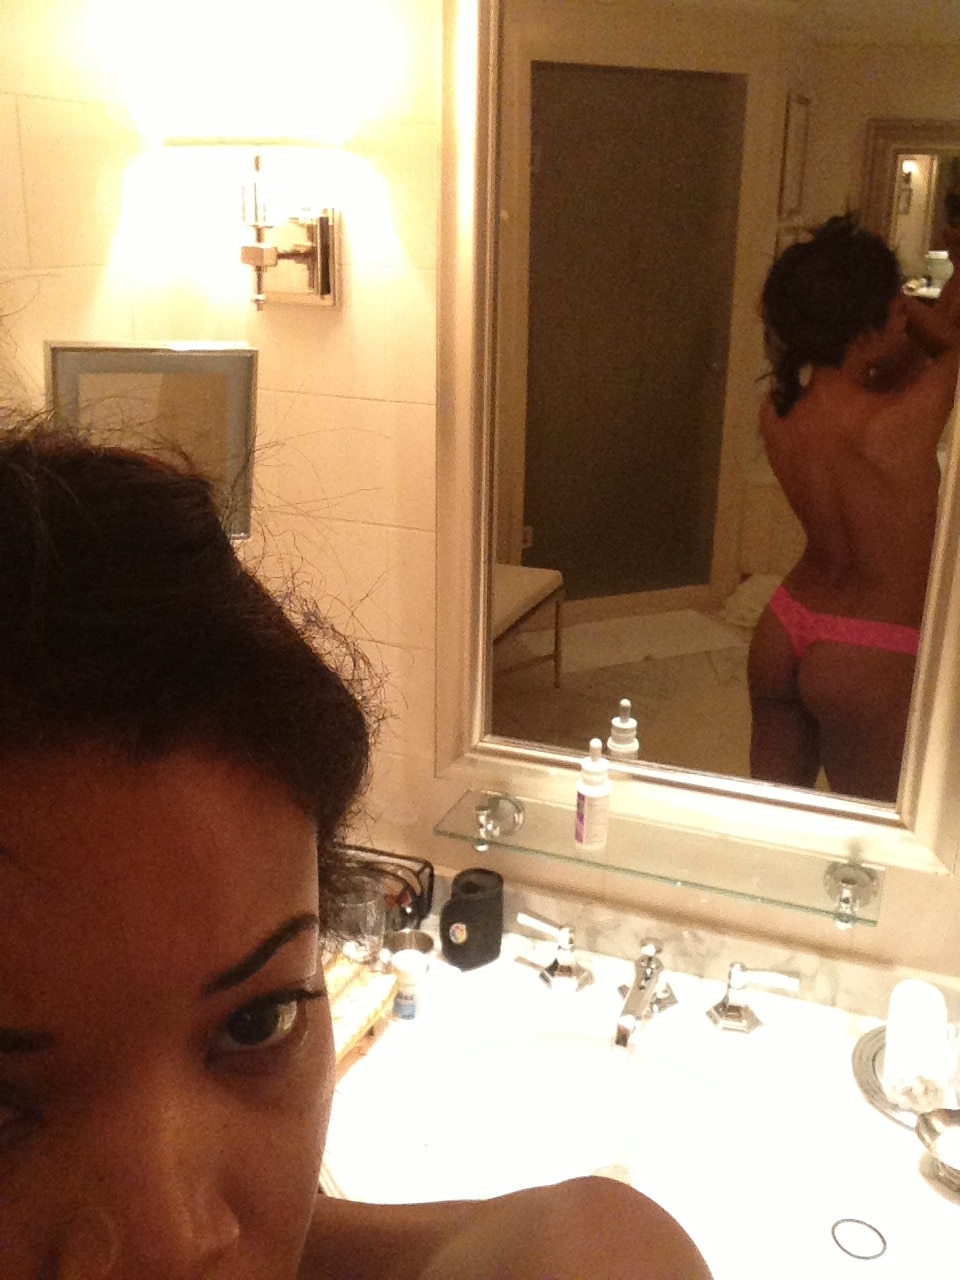 gabrielle union showing off her ass in mirror